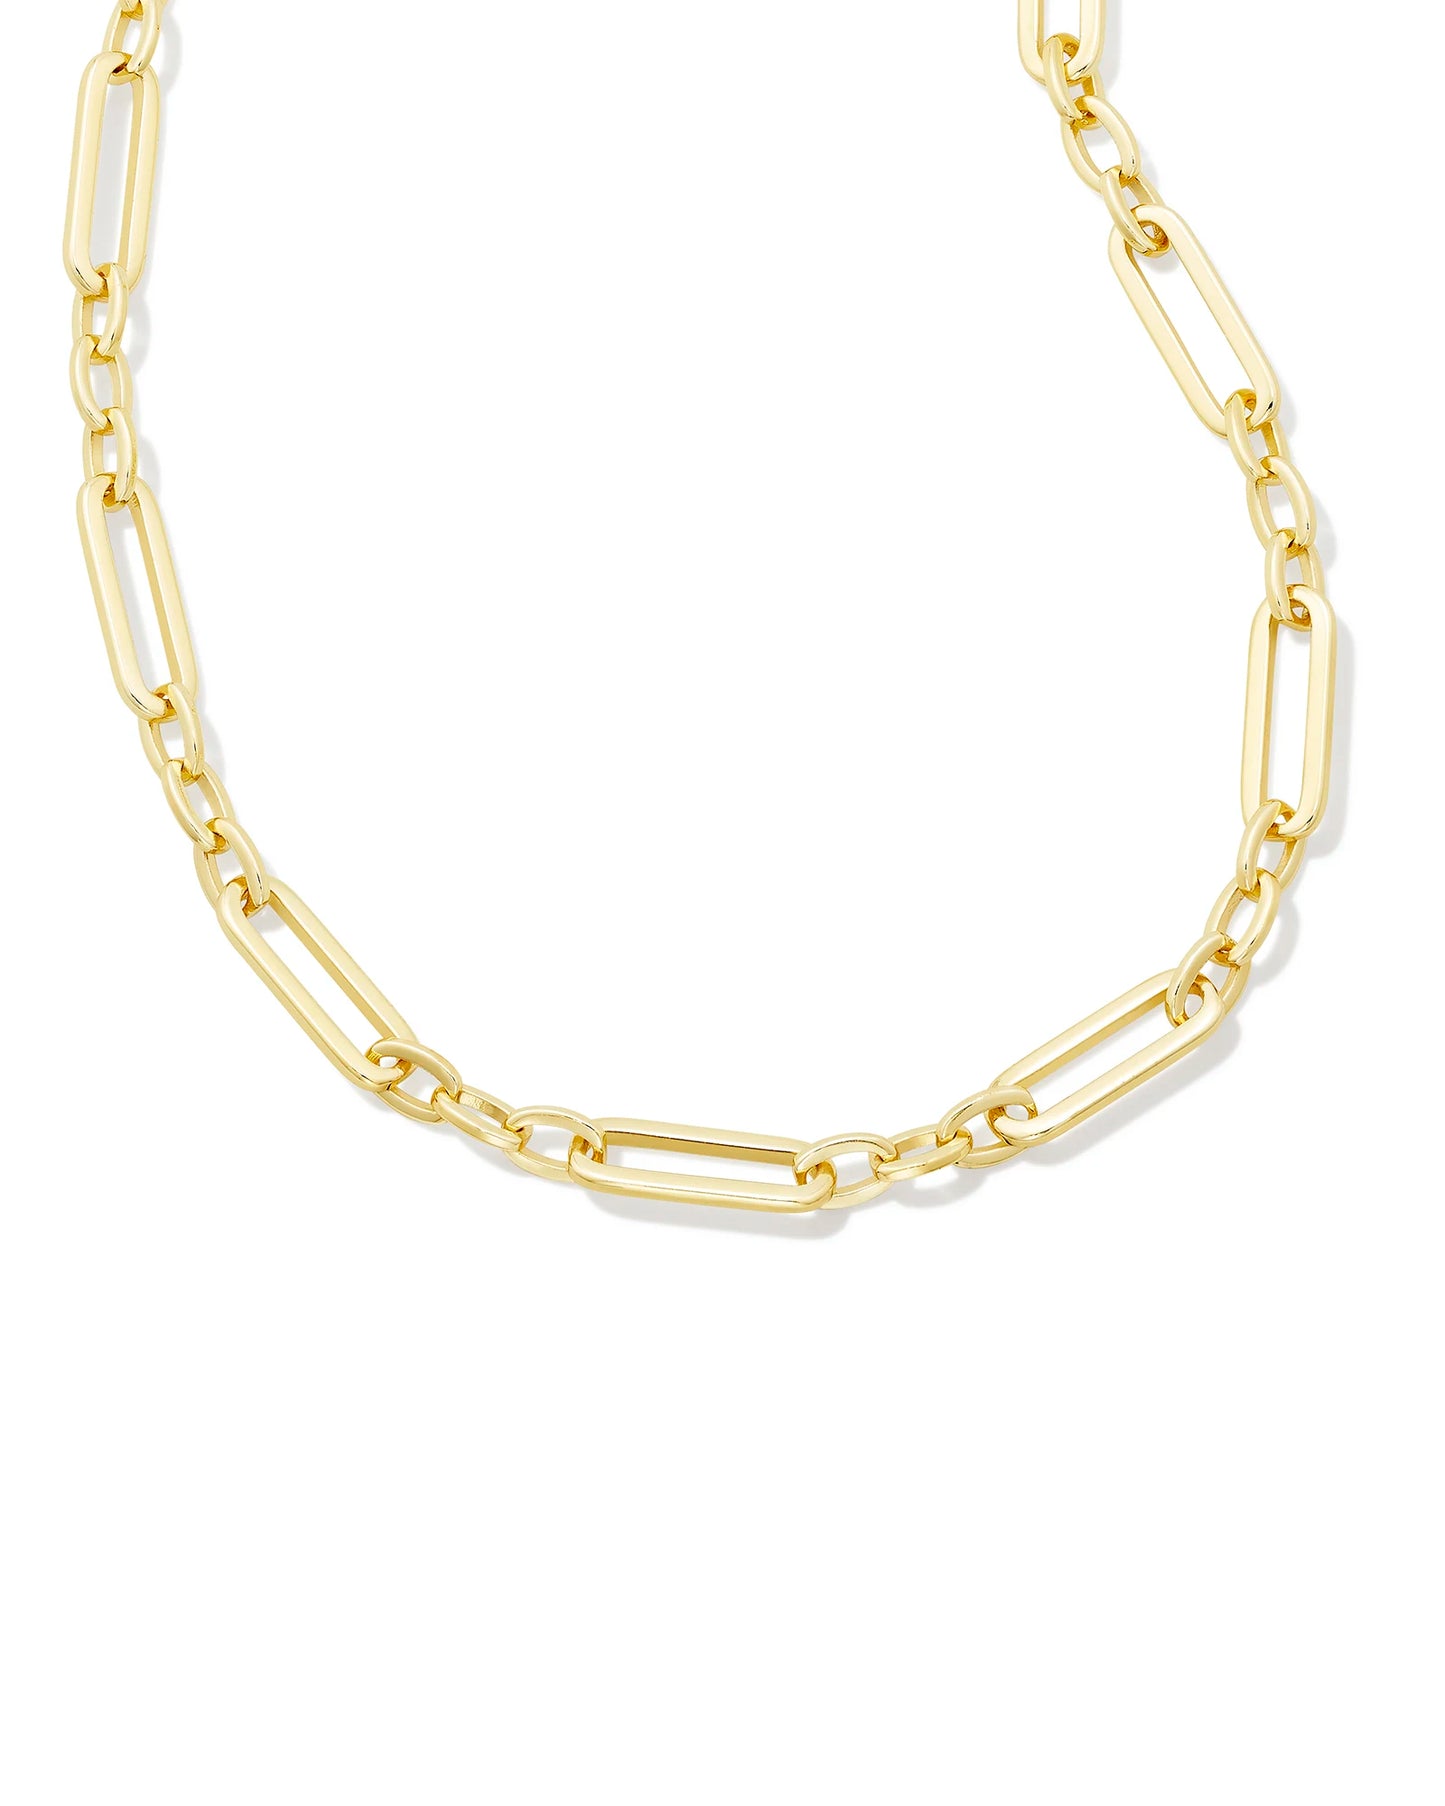 Kendra Scott Heather Link and Chain Necklace Gold-Necklaces-Kendra Scott-N00227GLD-The Twisted Chandelier